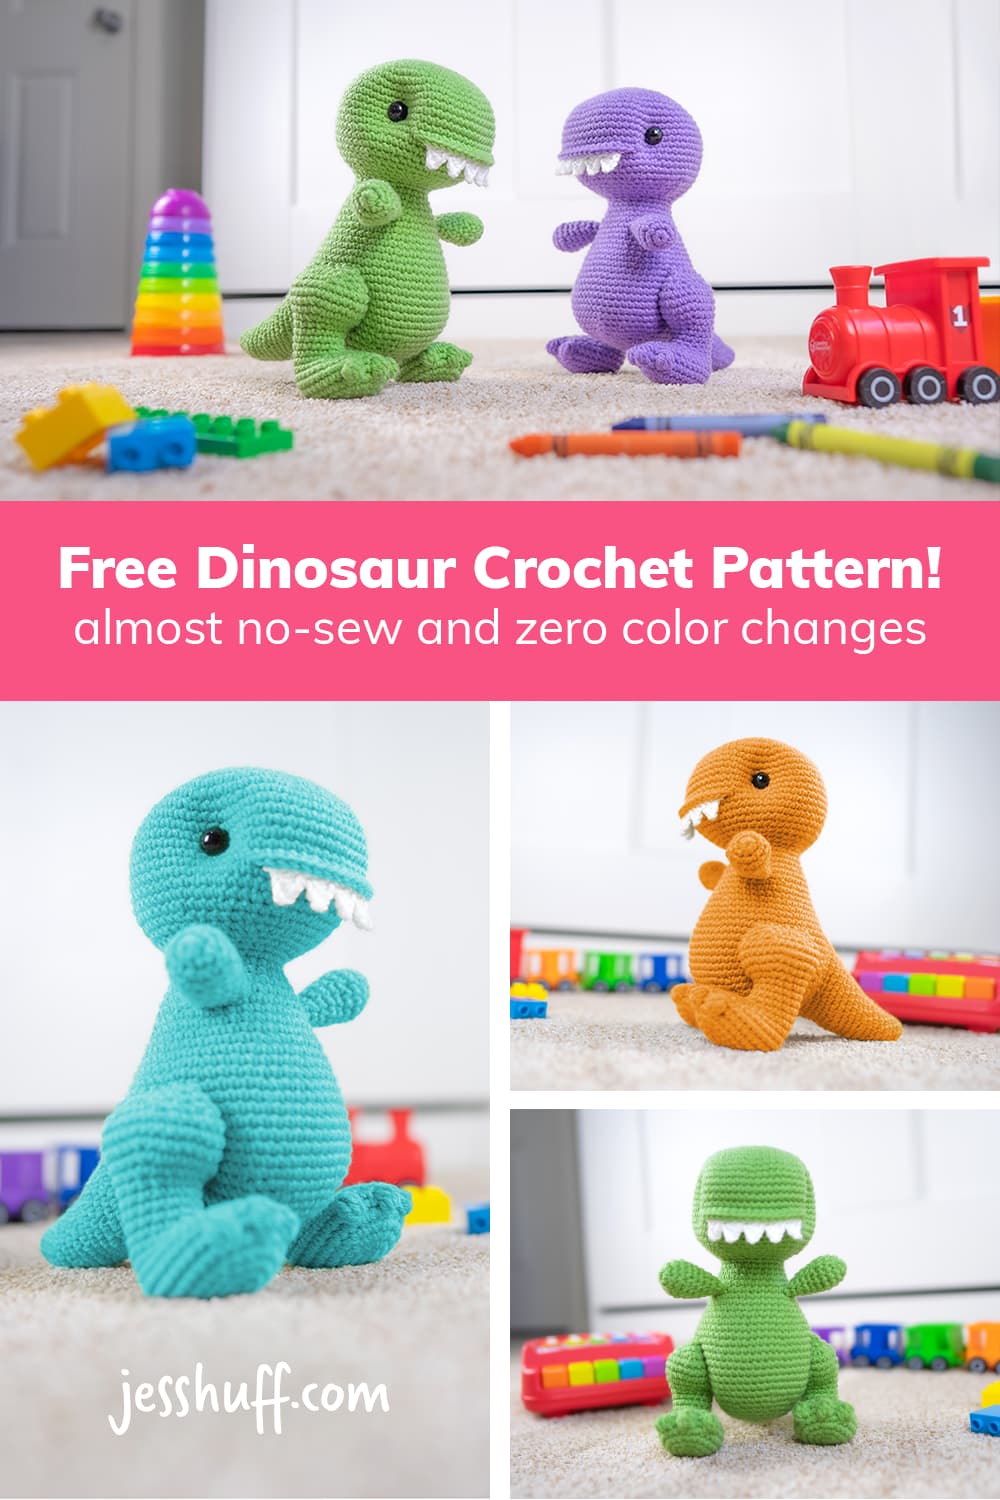 This nearly no-sew dino amigurumi pattern is available for free! It stands 10.5" tall when crocheted with worsted weight yarn and a 3.5mm hook. via @heyjesshuff